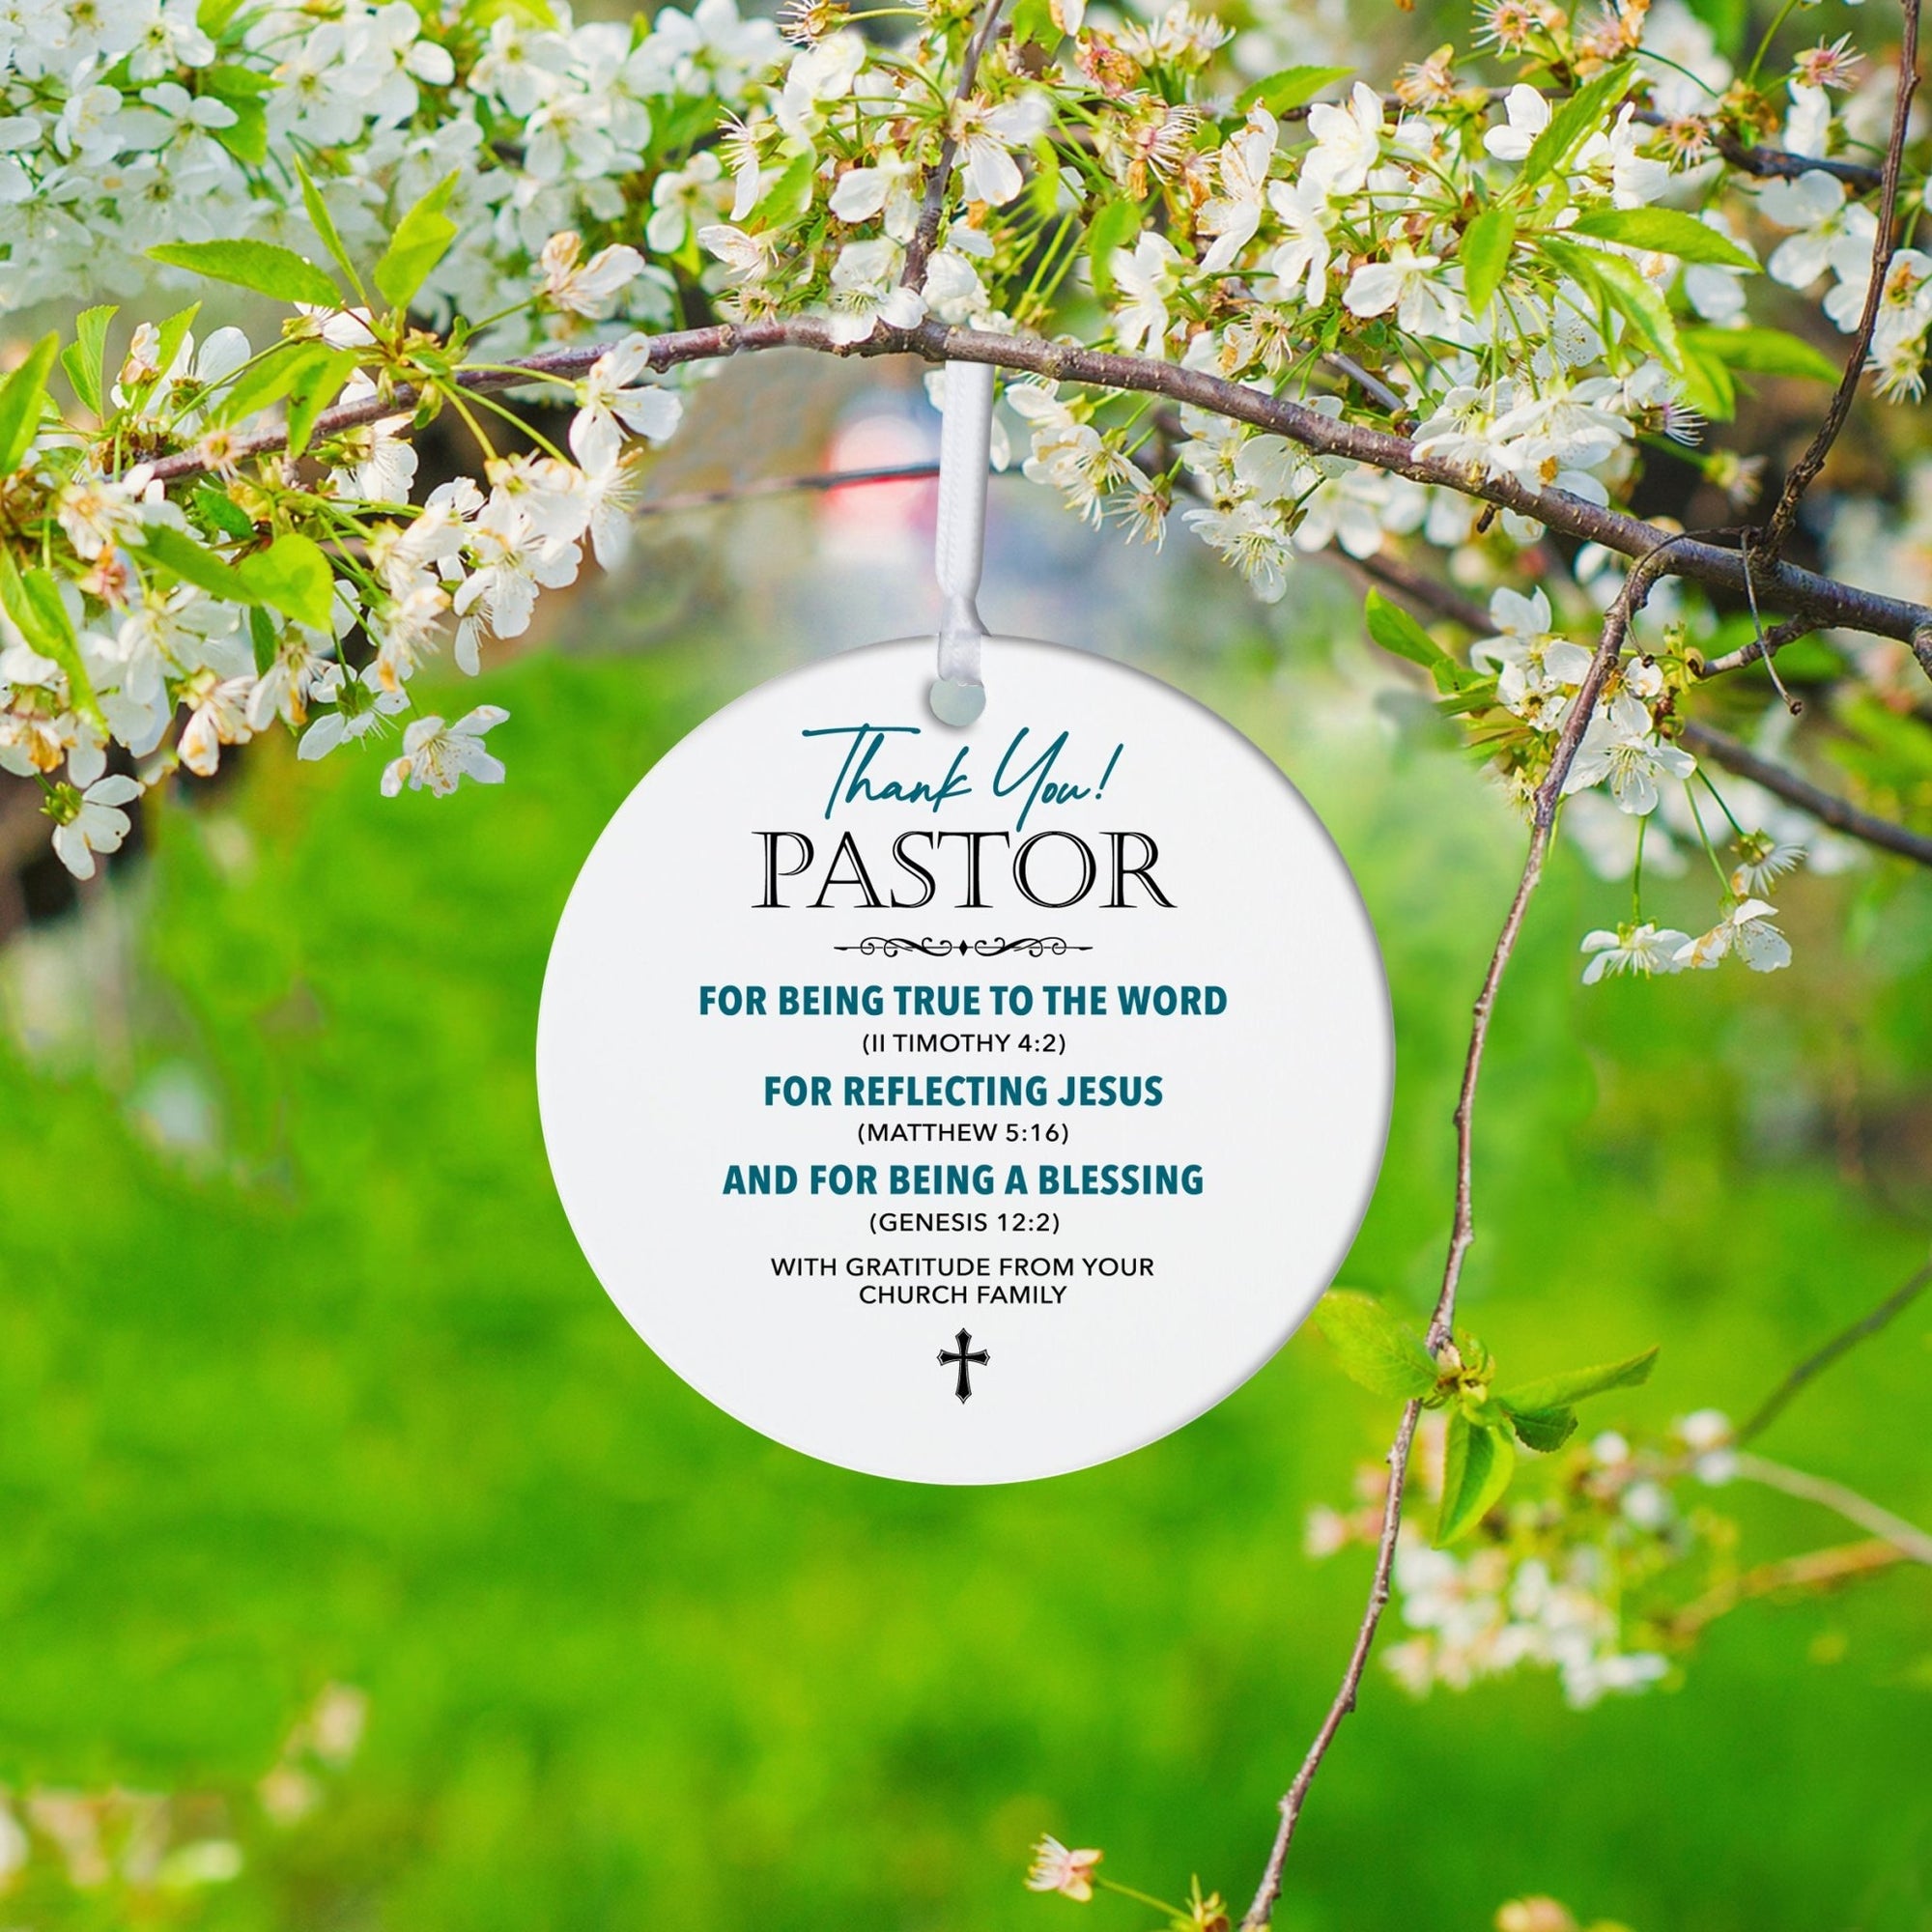 Pastors’ White Ornament With Inspirational Message Gift Ideas - Thank You! Pastor For Being True To The Word - LifeSong Milestones